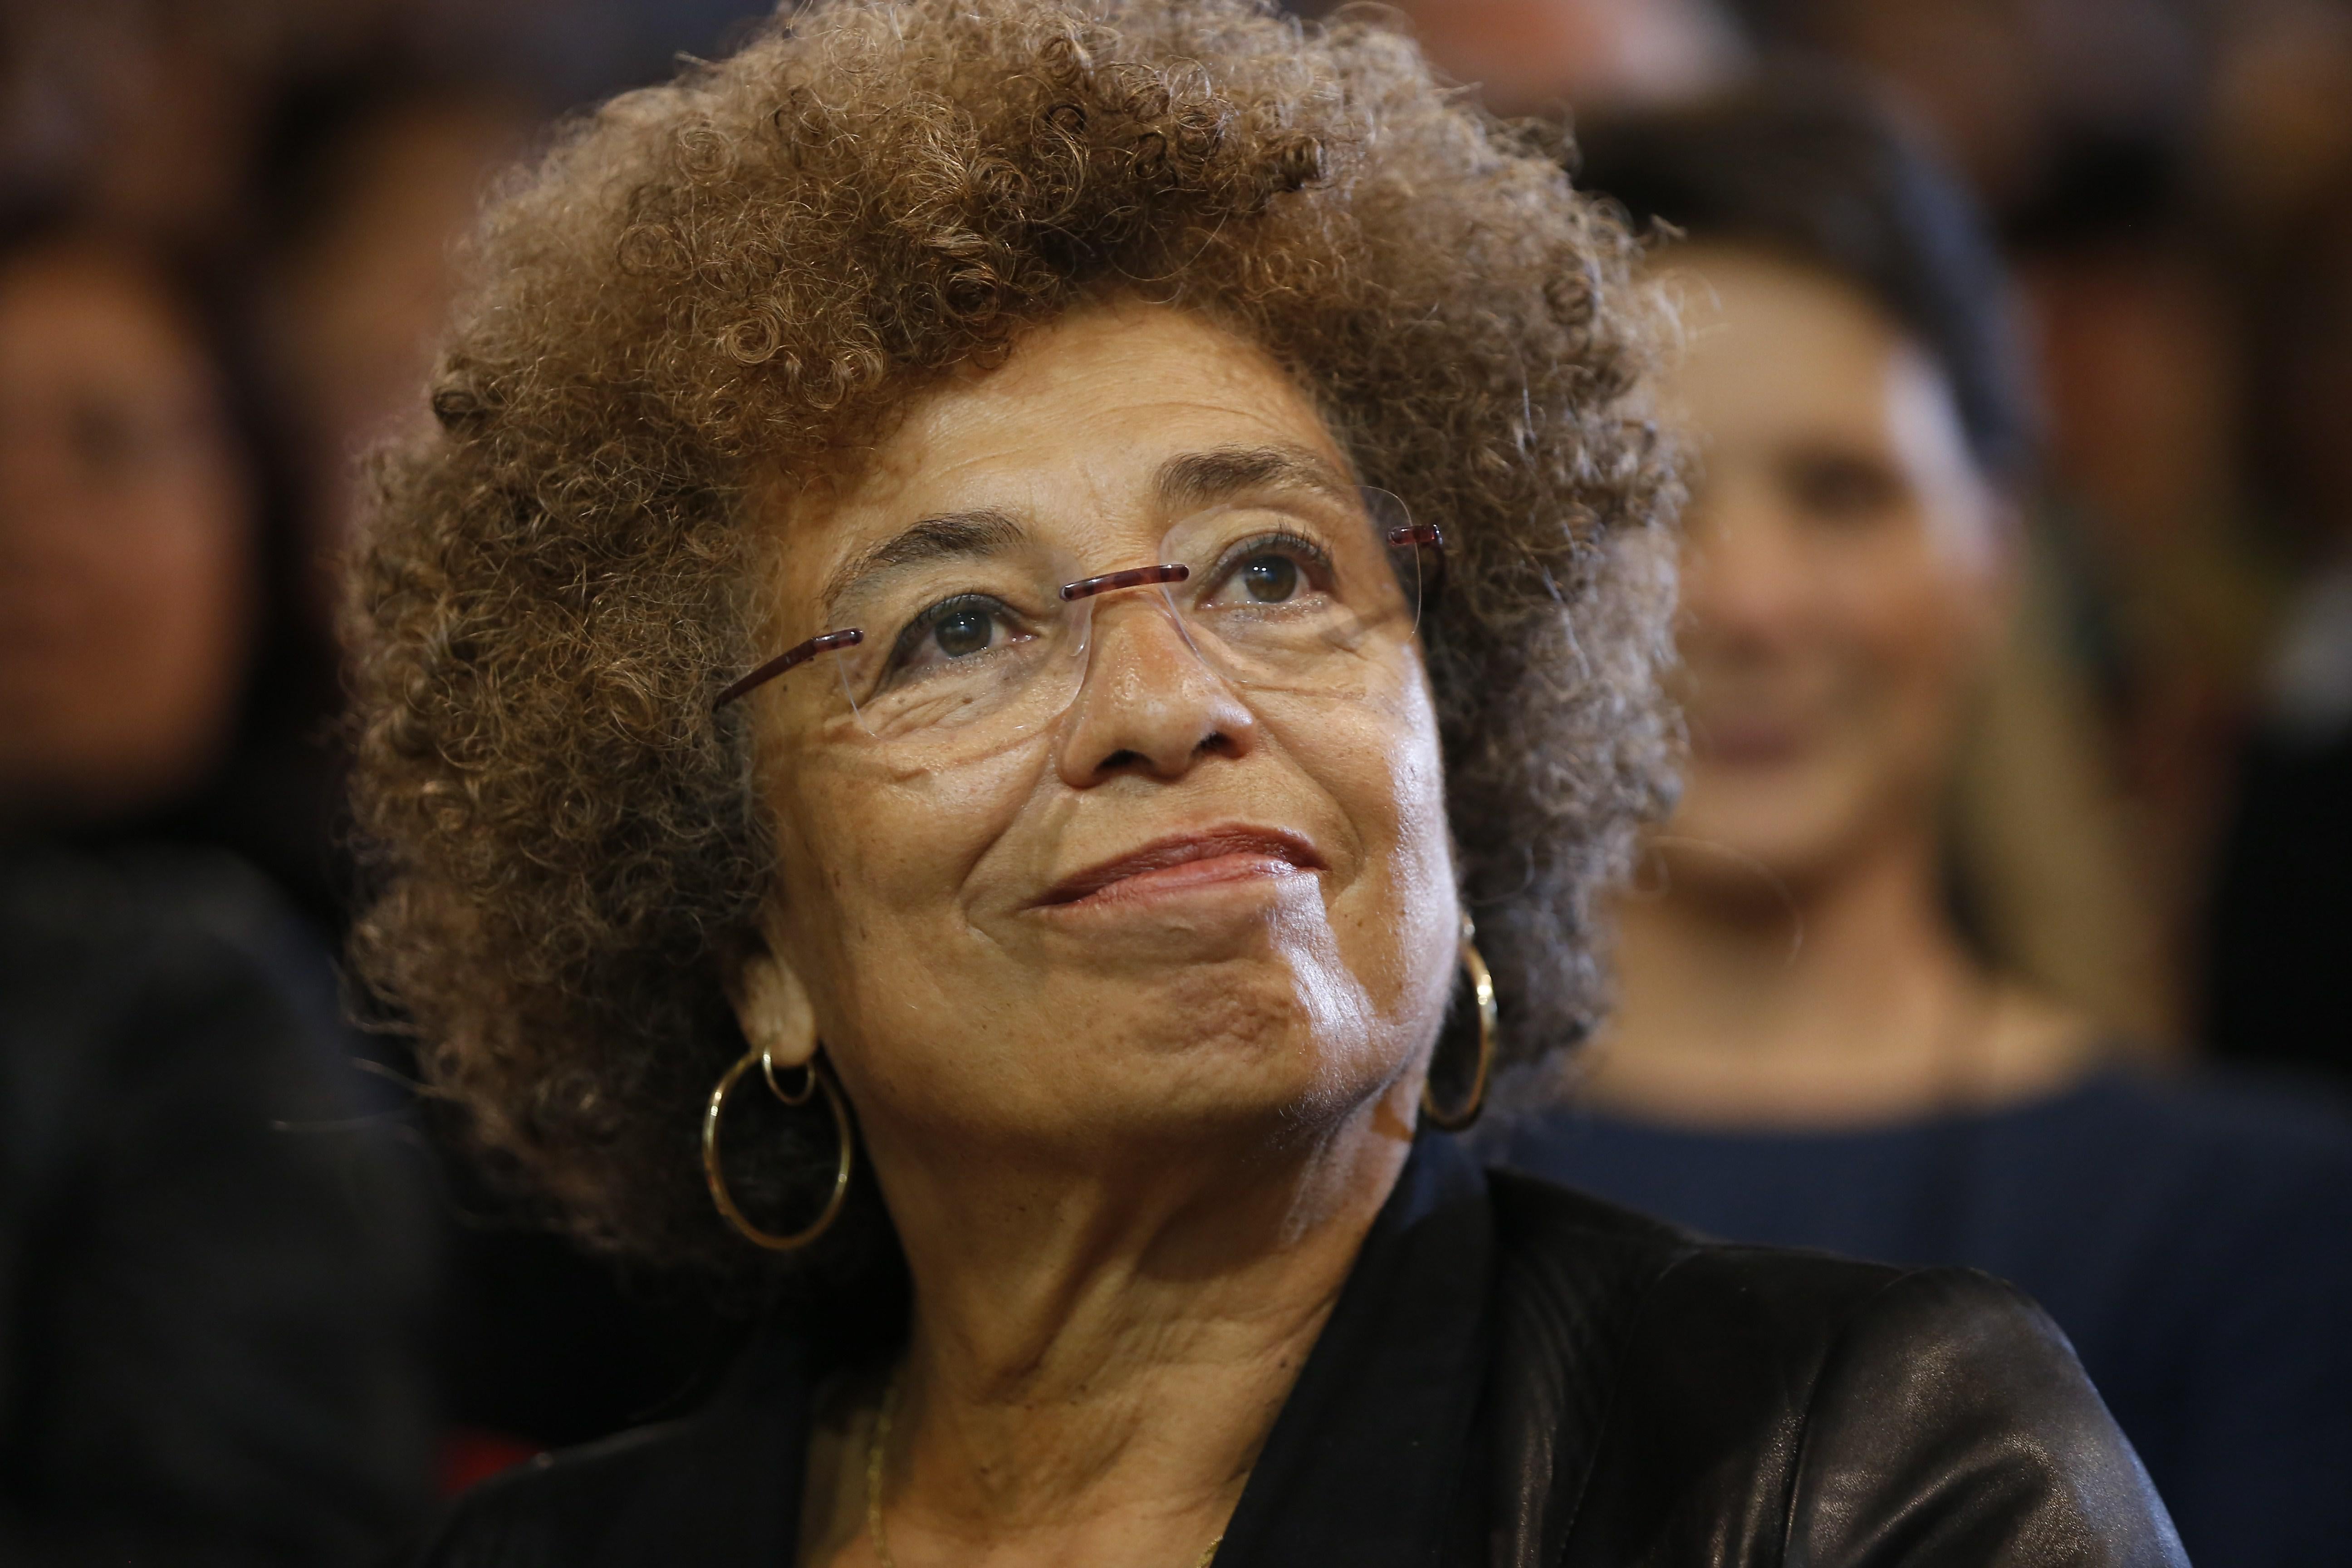 Angela Davis, sitting in front of a crowd, smiles toward the camera